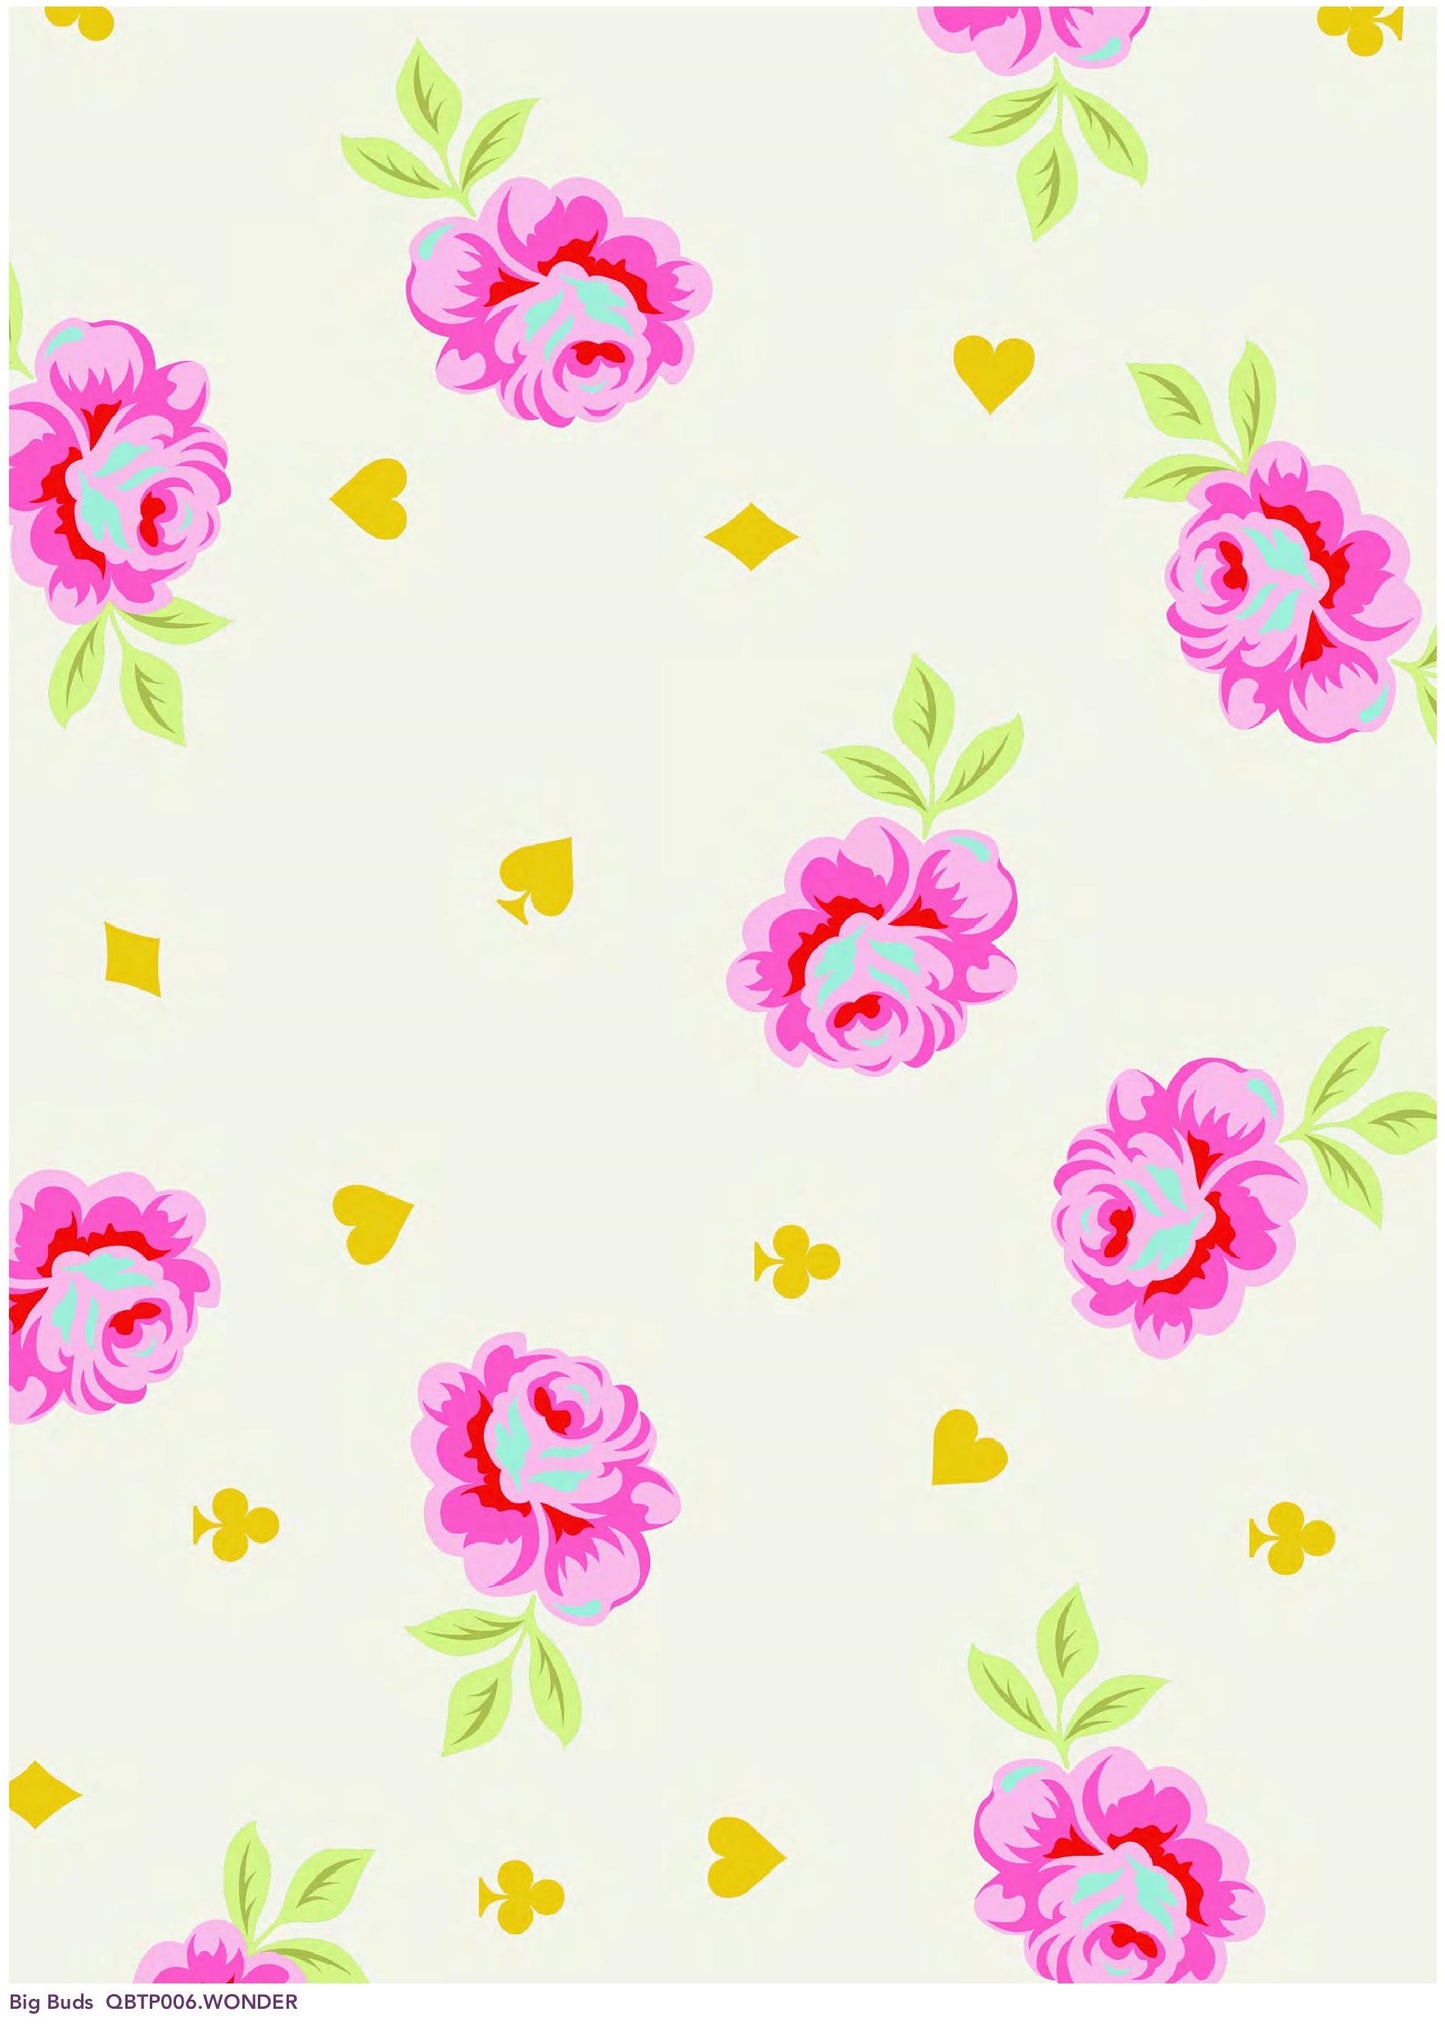 Big Buds in Wonder 108″ Wide Backing - Curiouser & Curiouser by Tula Pink | QBTP006.WONDER